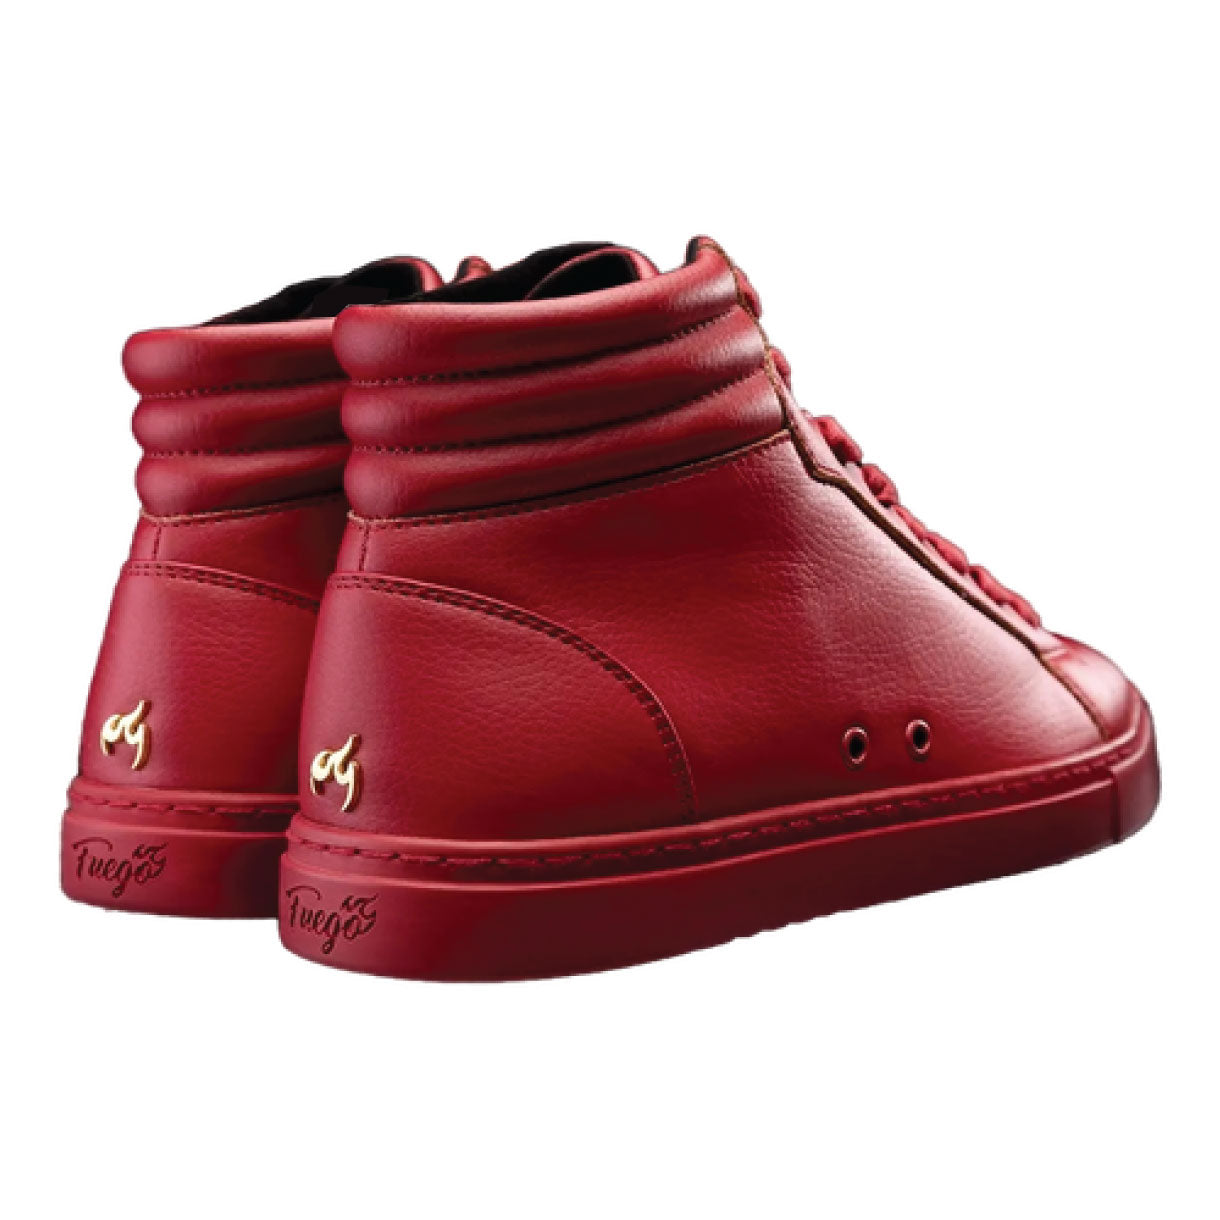 Fuego high-top dance sneakers in red